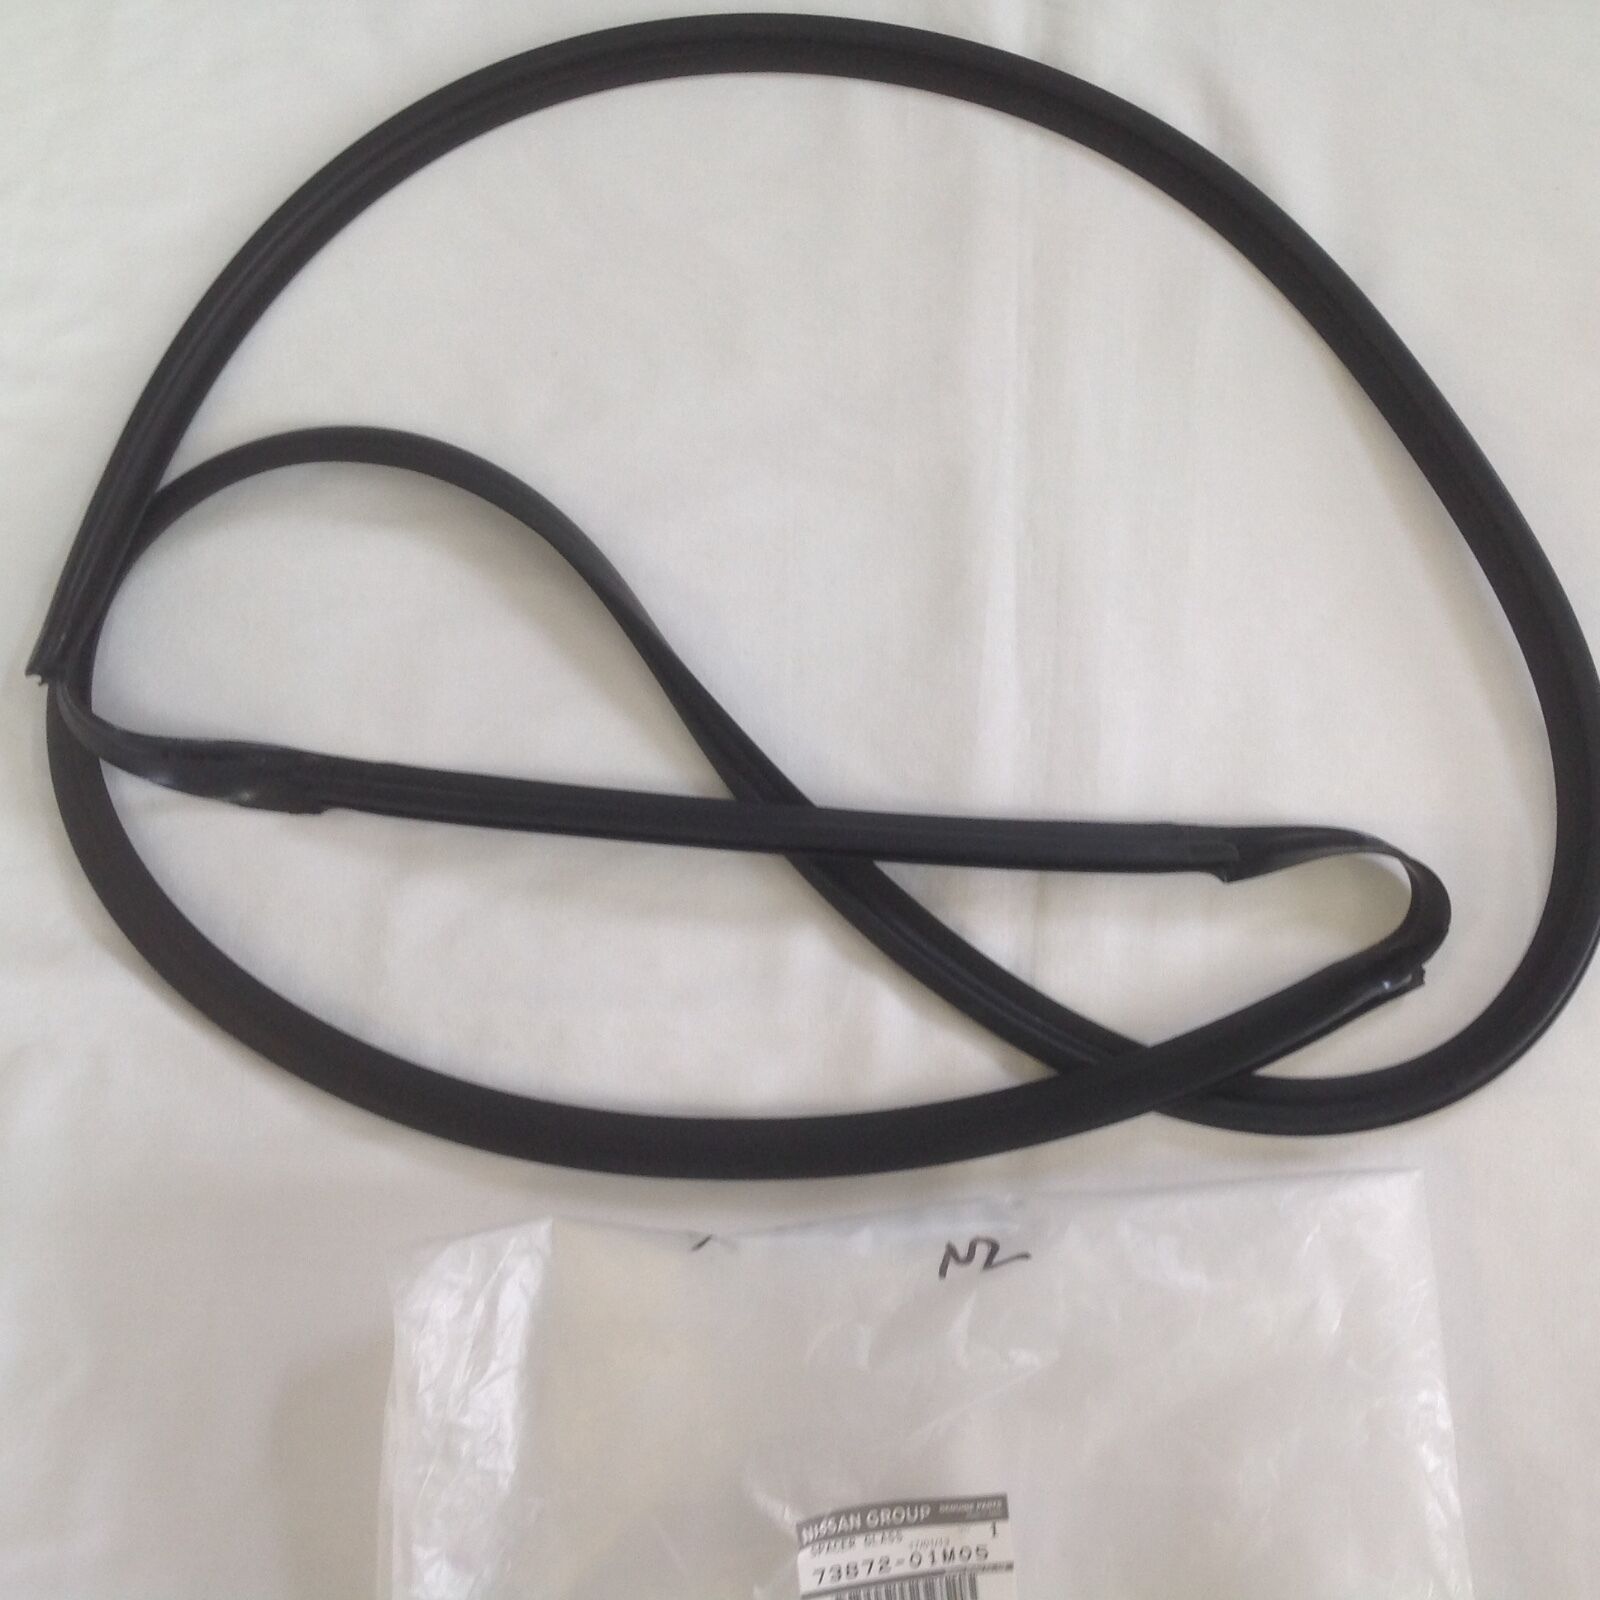 GENUINE 90-93 240SX HATCH SUNROOF WEATHERSTRIP CONNECTS TO THE GLASS 73872-01M05